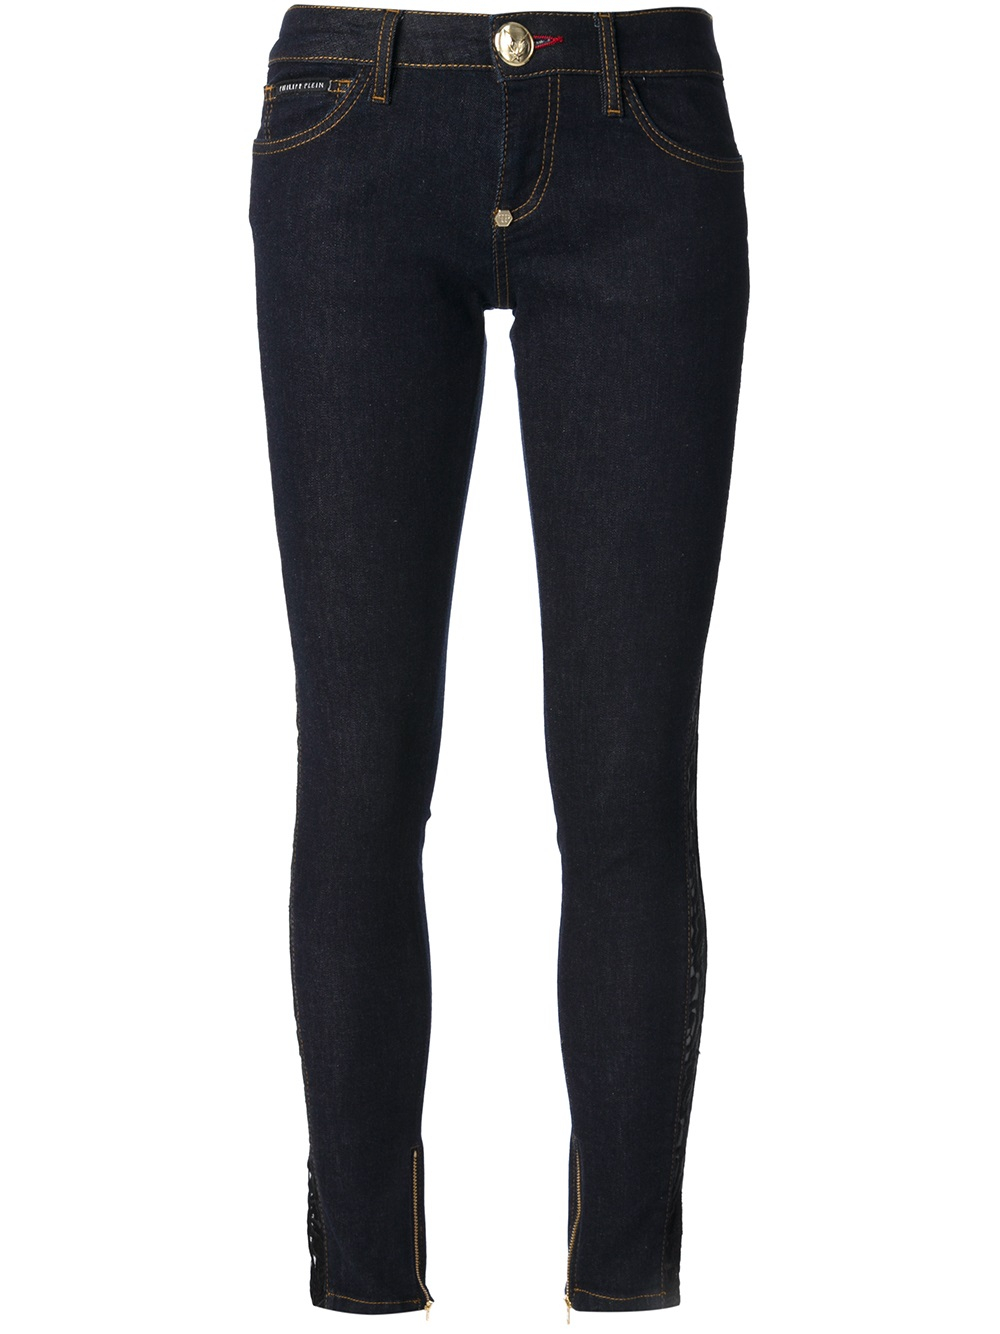 Lyst - Philipp Plein Embroidered Skinny Jeans in Blue